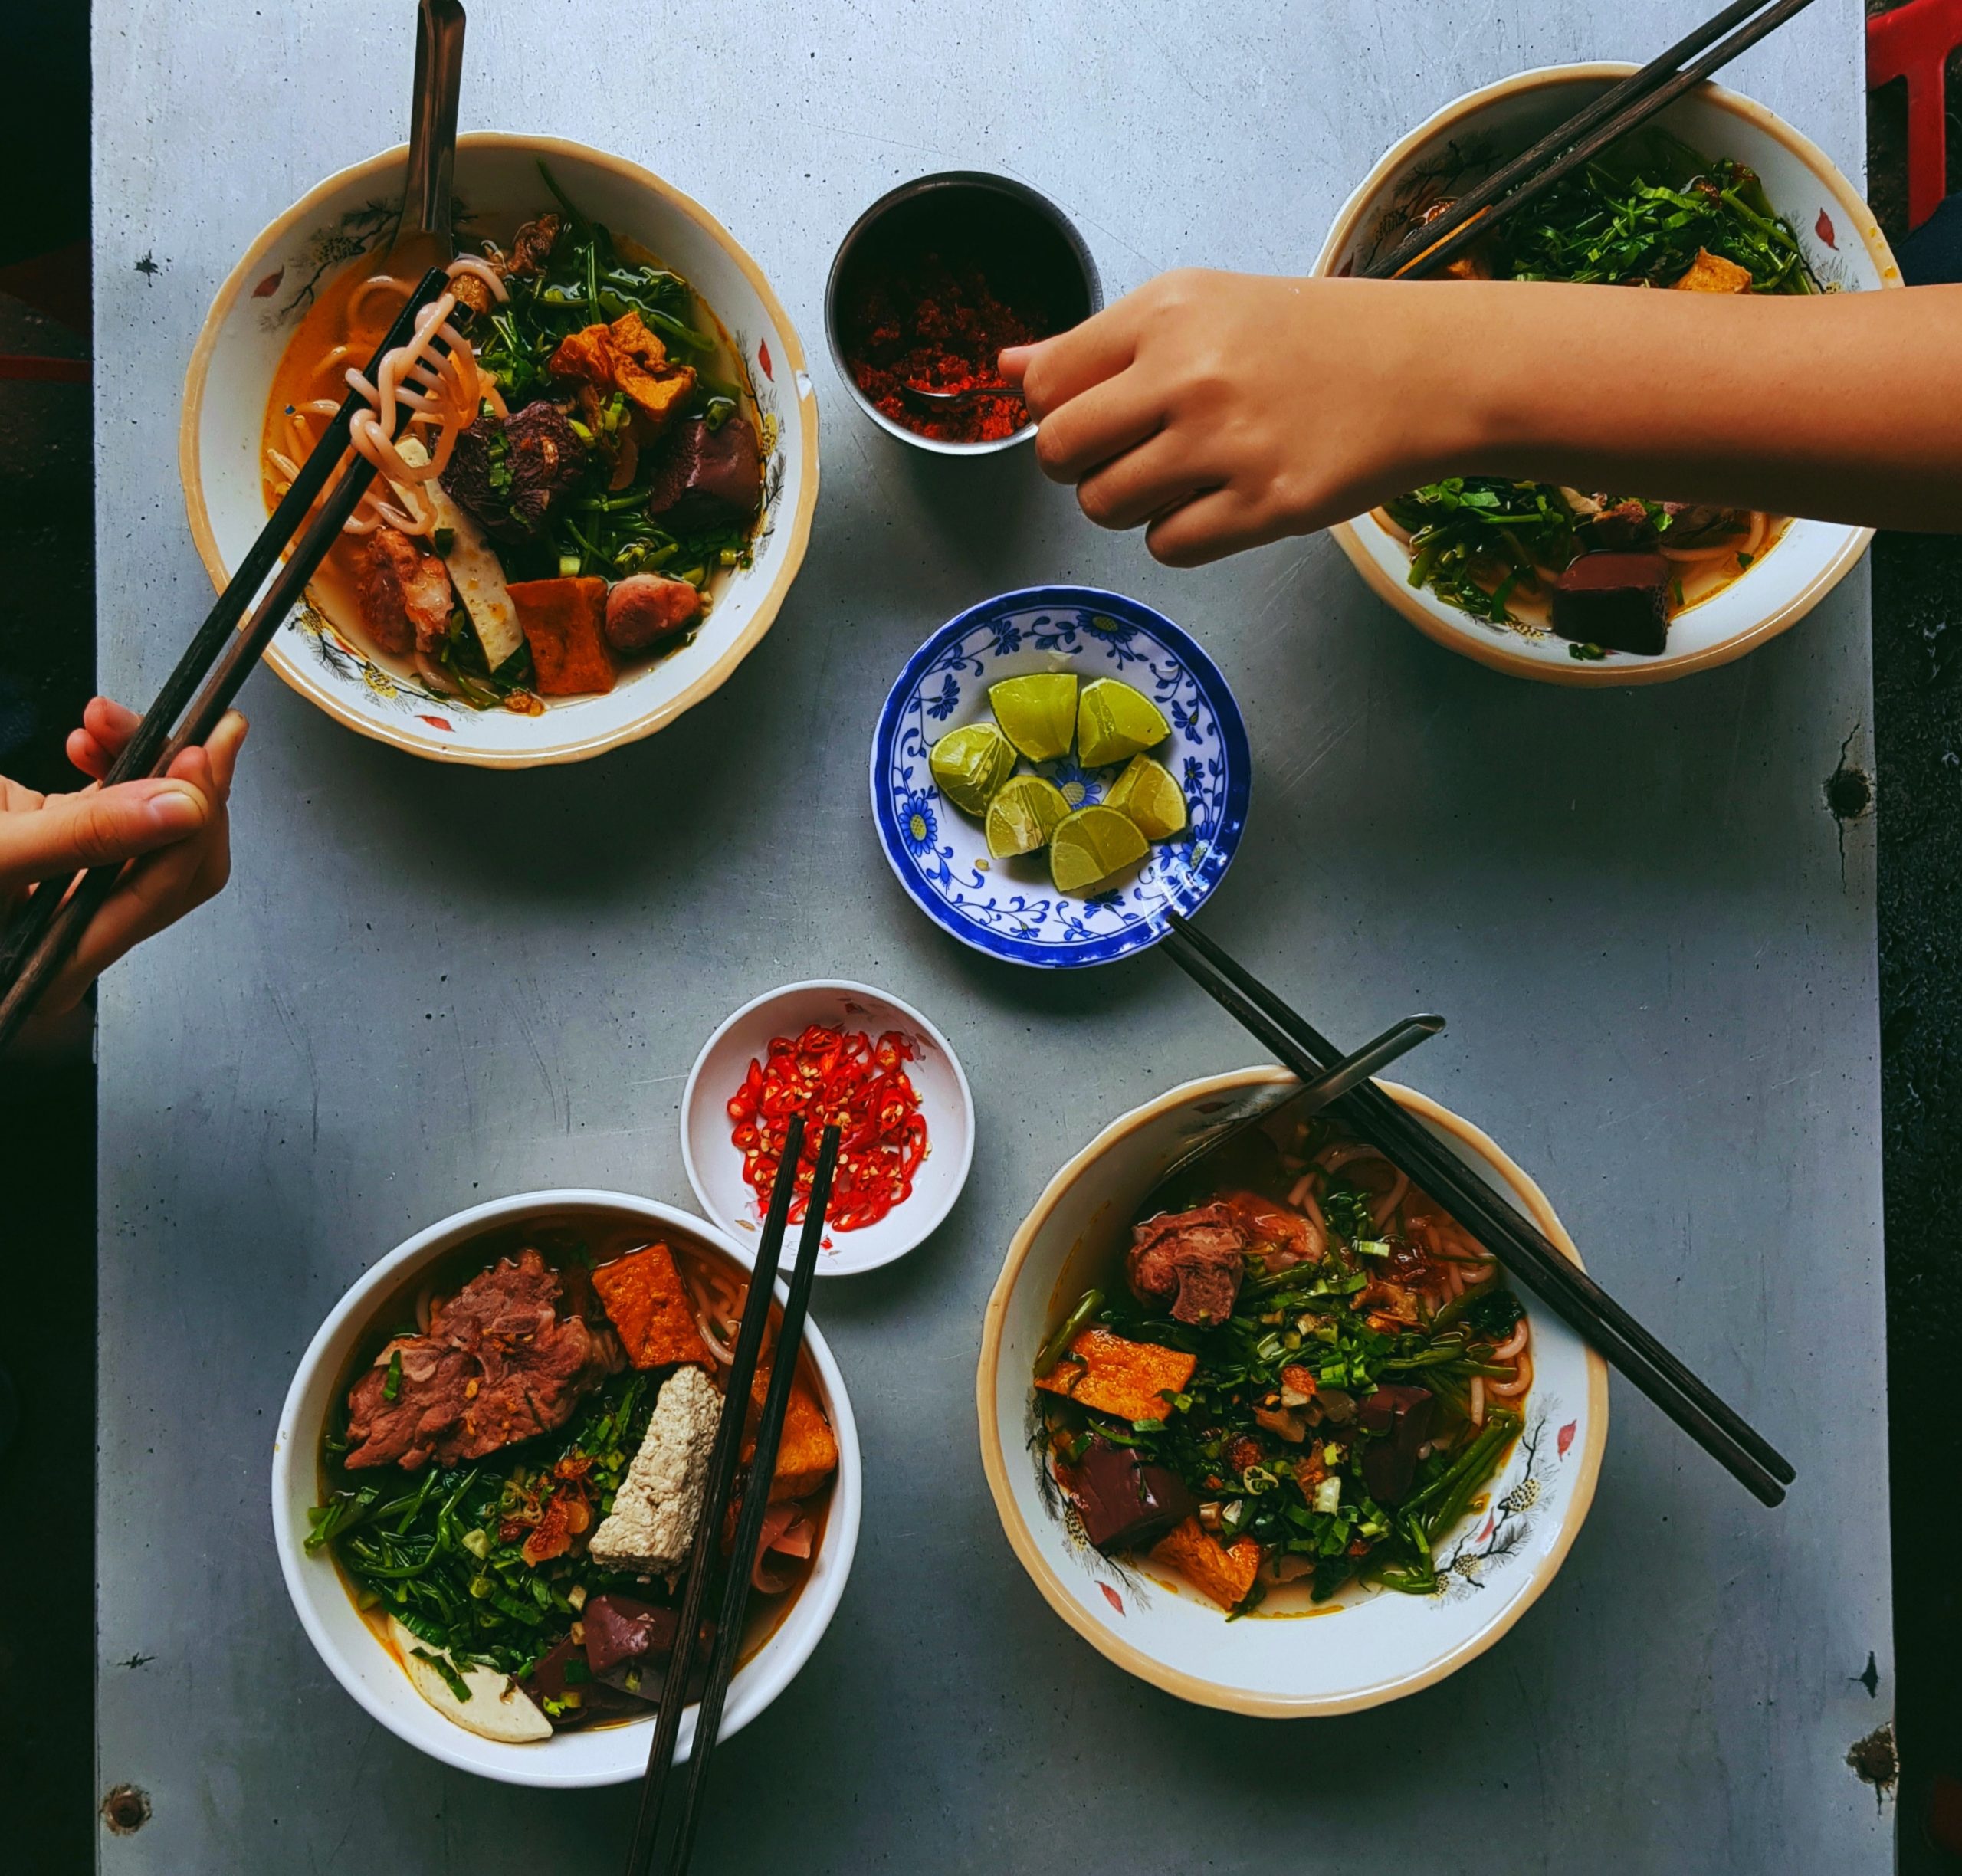 Image shows four bowls of food, each containing noodles, a type of meat, green leafy vegetables and green onions in a broth. Each bowl has chopsticks resting on the side, and there are two smaller bowls in the centre holding lime and chilis.